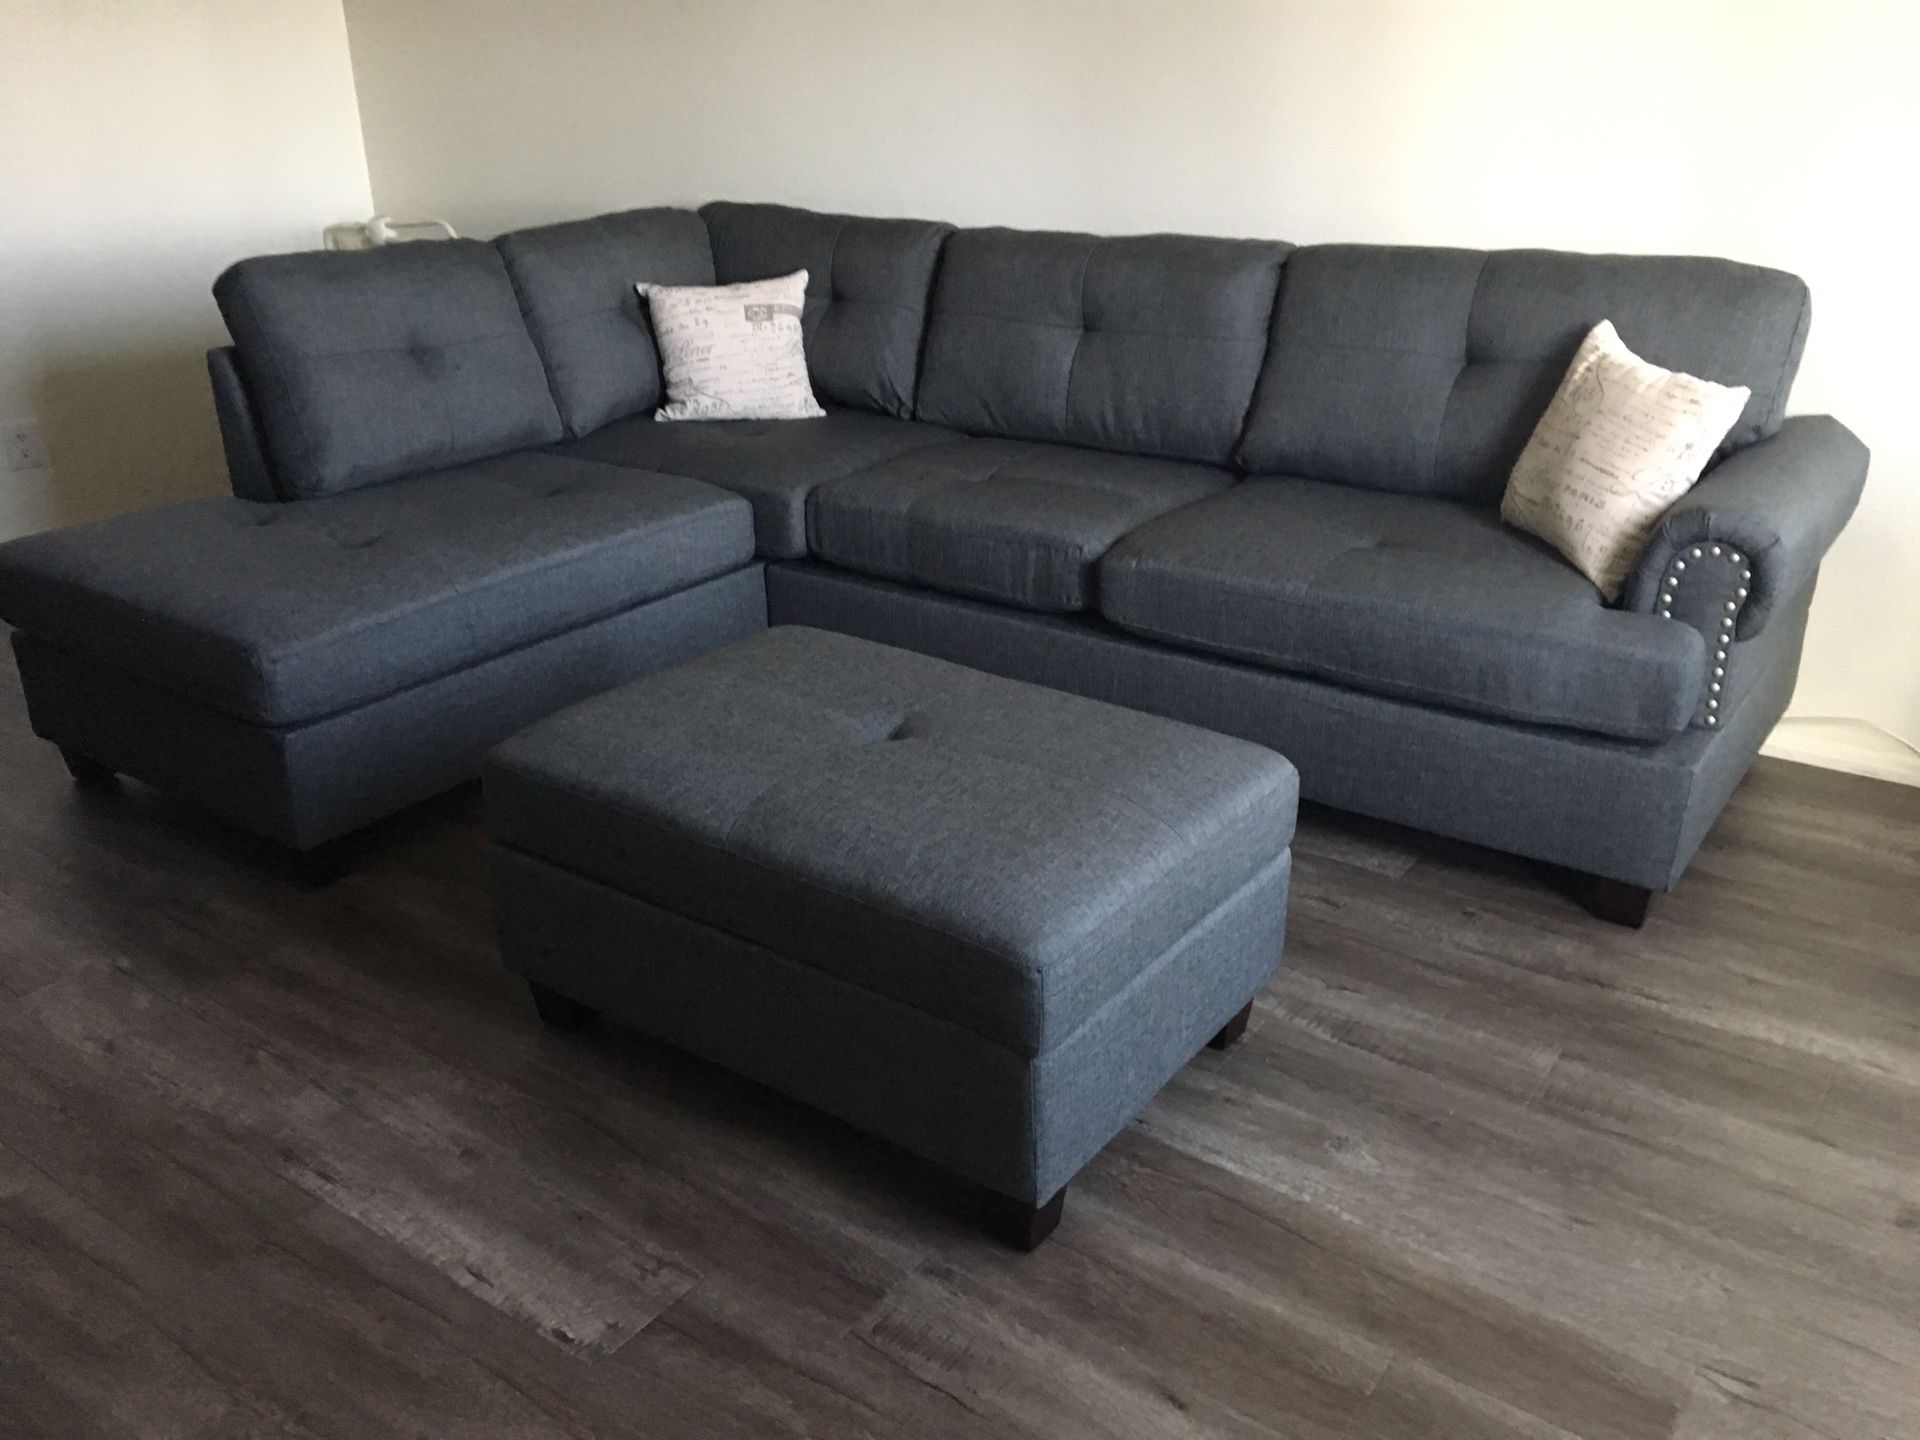 New in box blue grey sectional sofa ottoman with storage included// reversible chaise 107”x75”